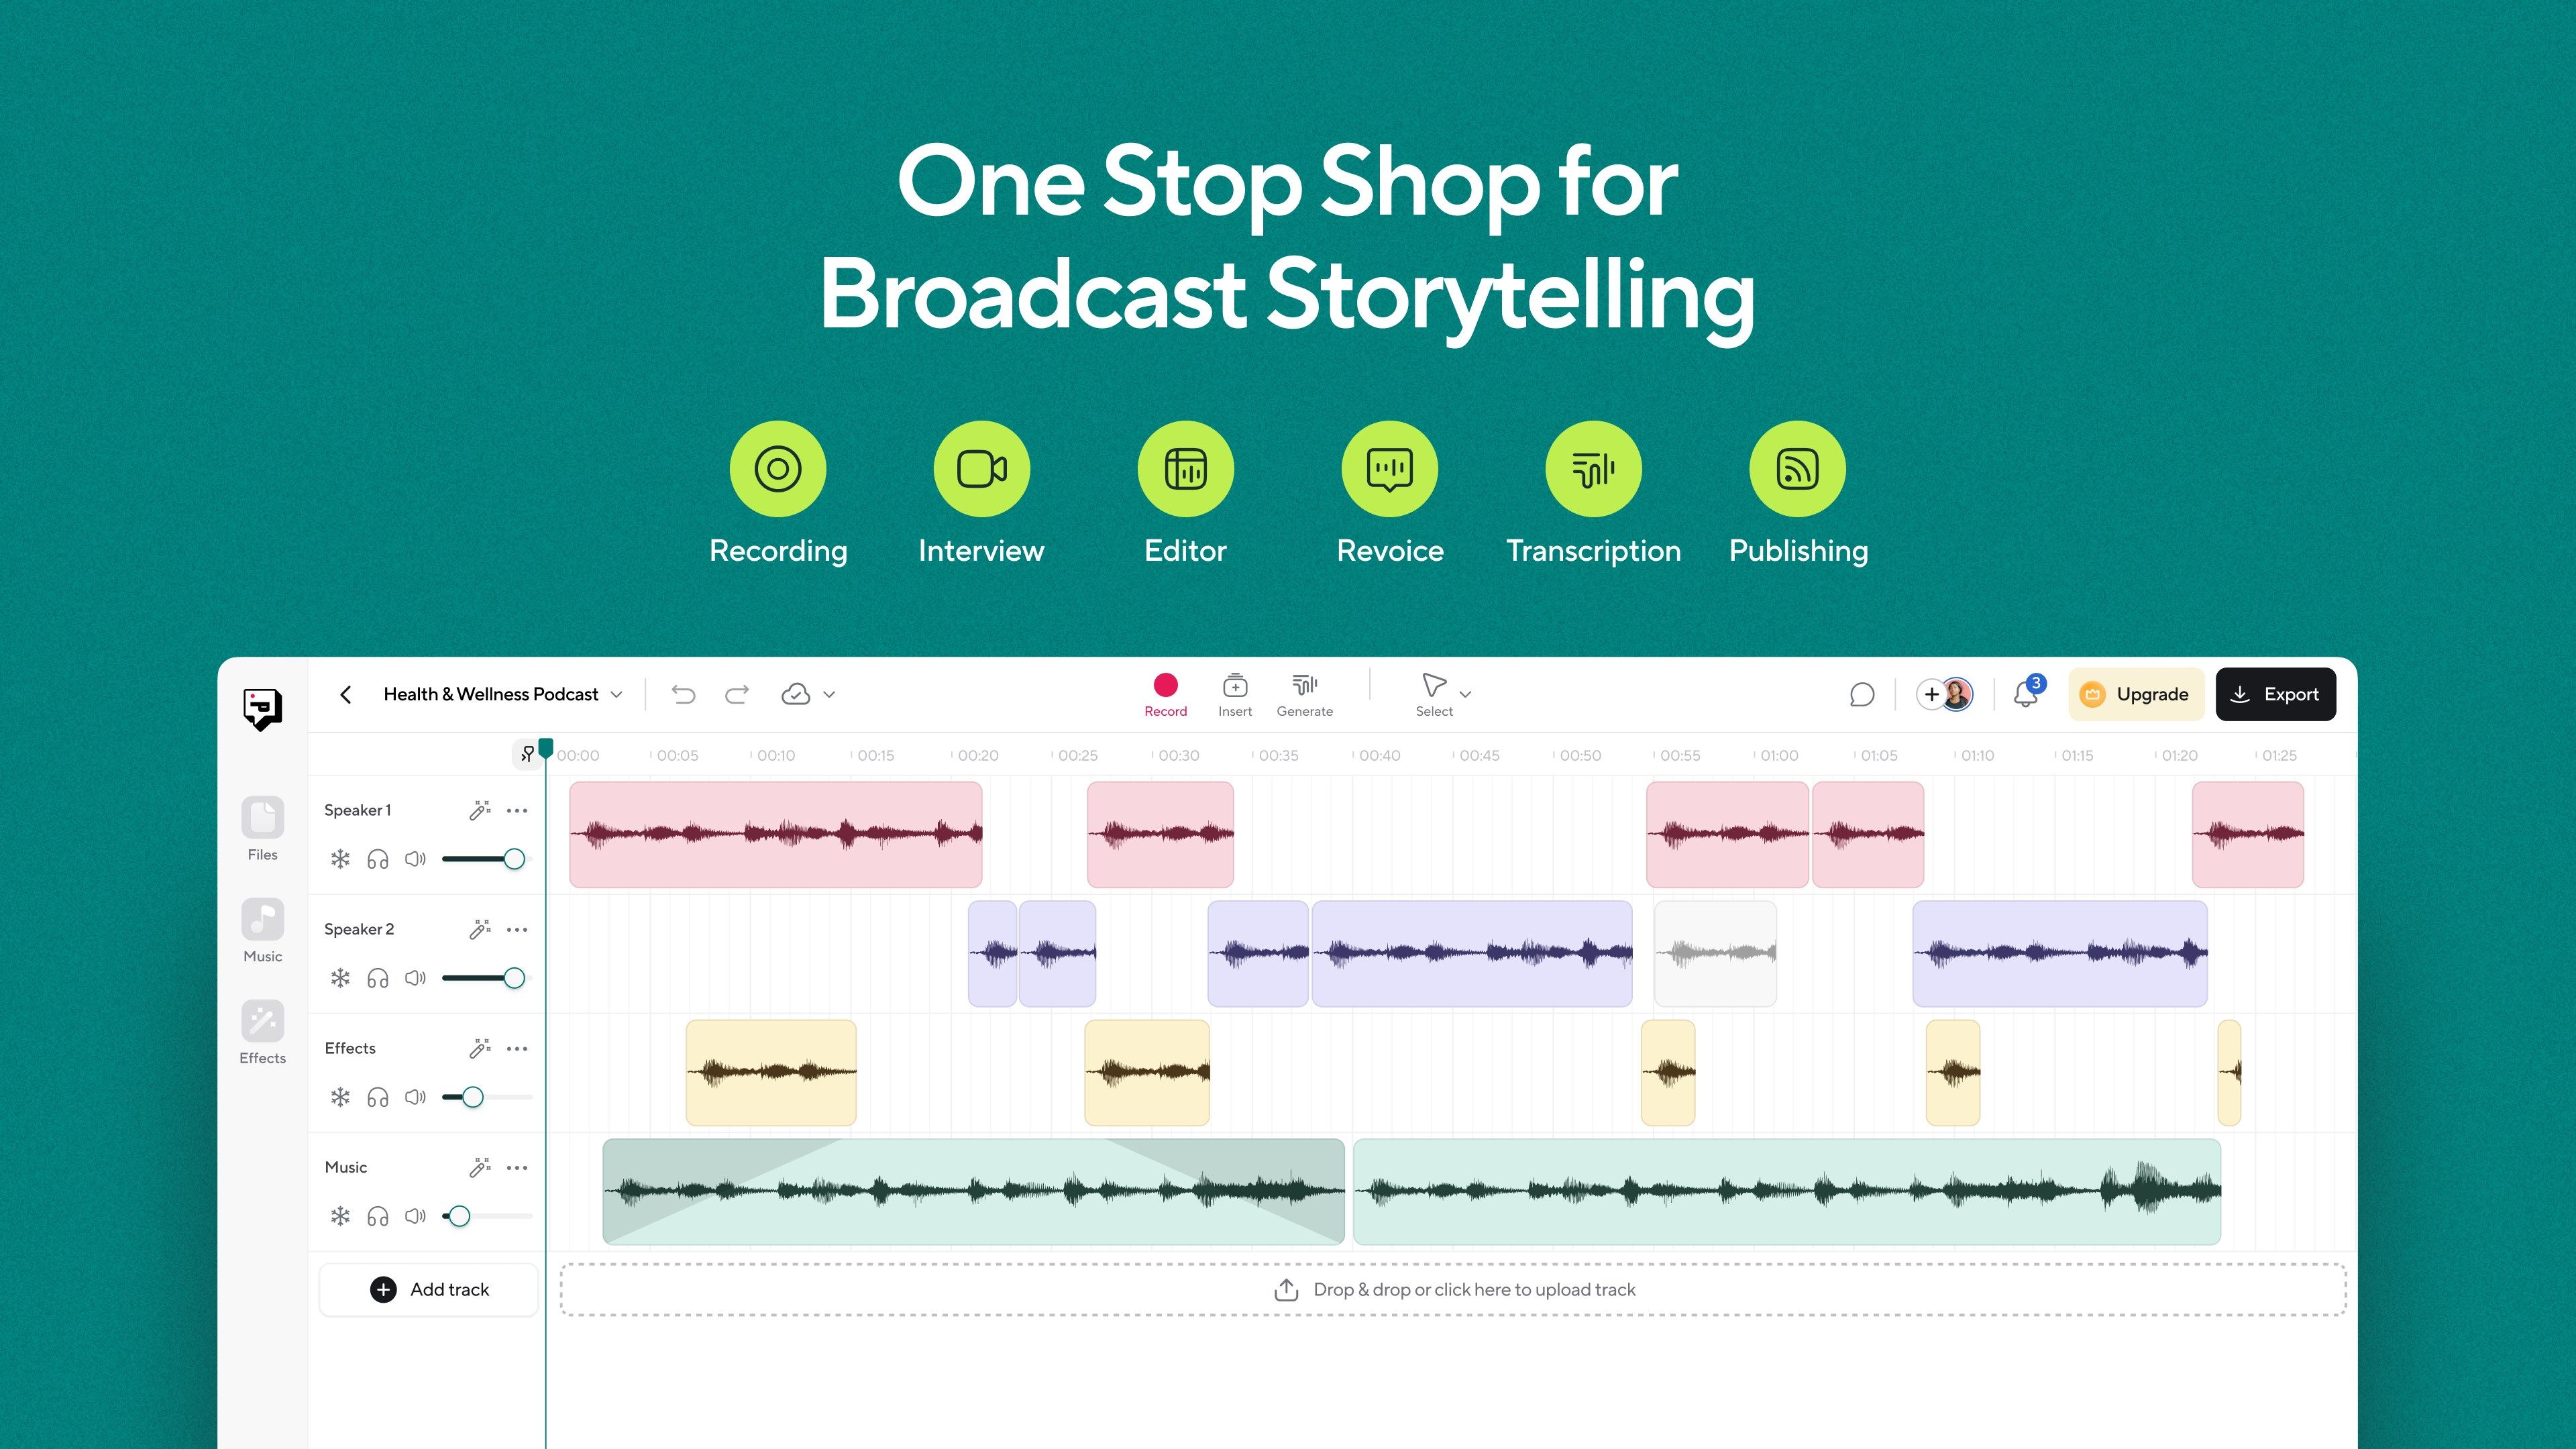 One Stop Shop for Broadcast Storytelling